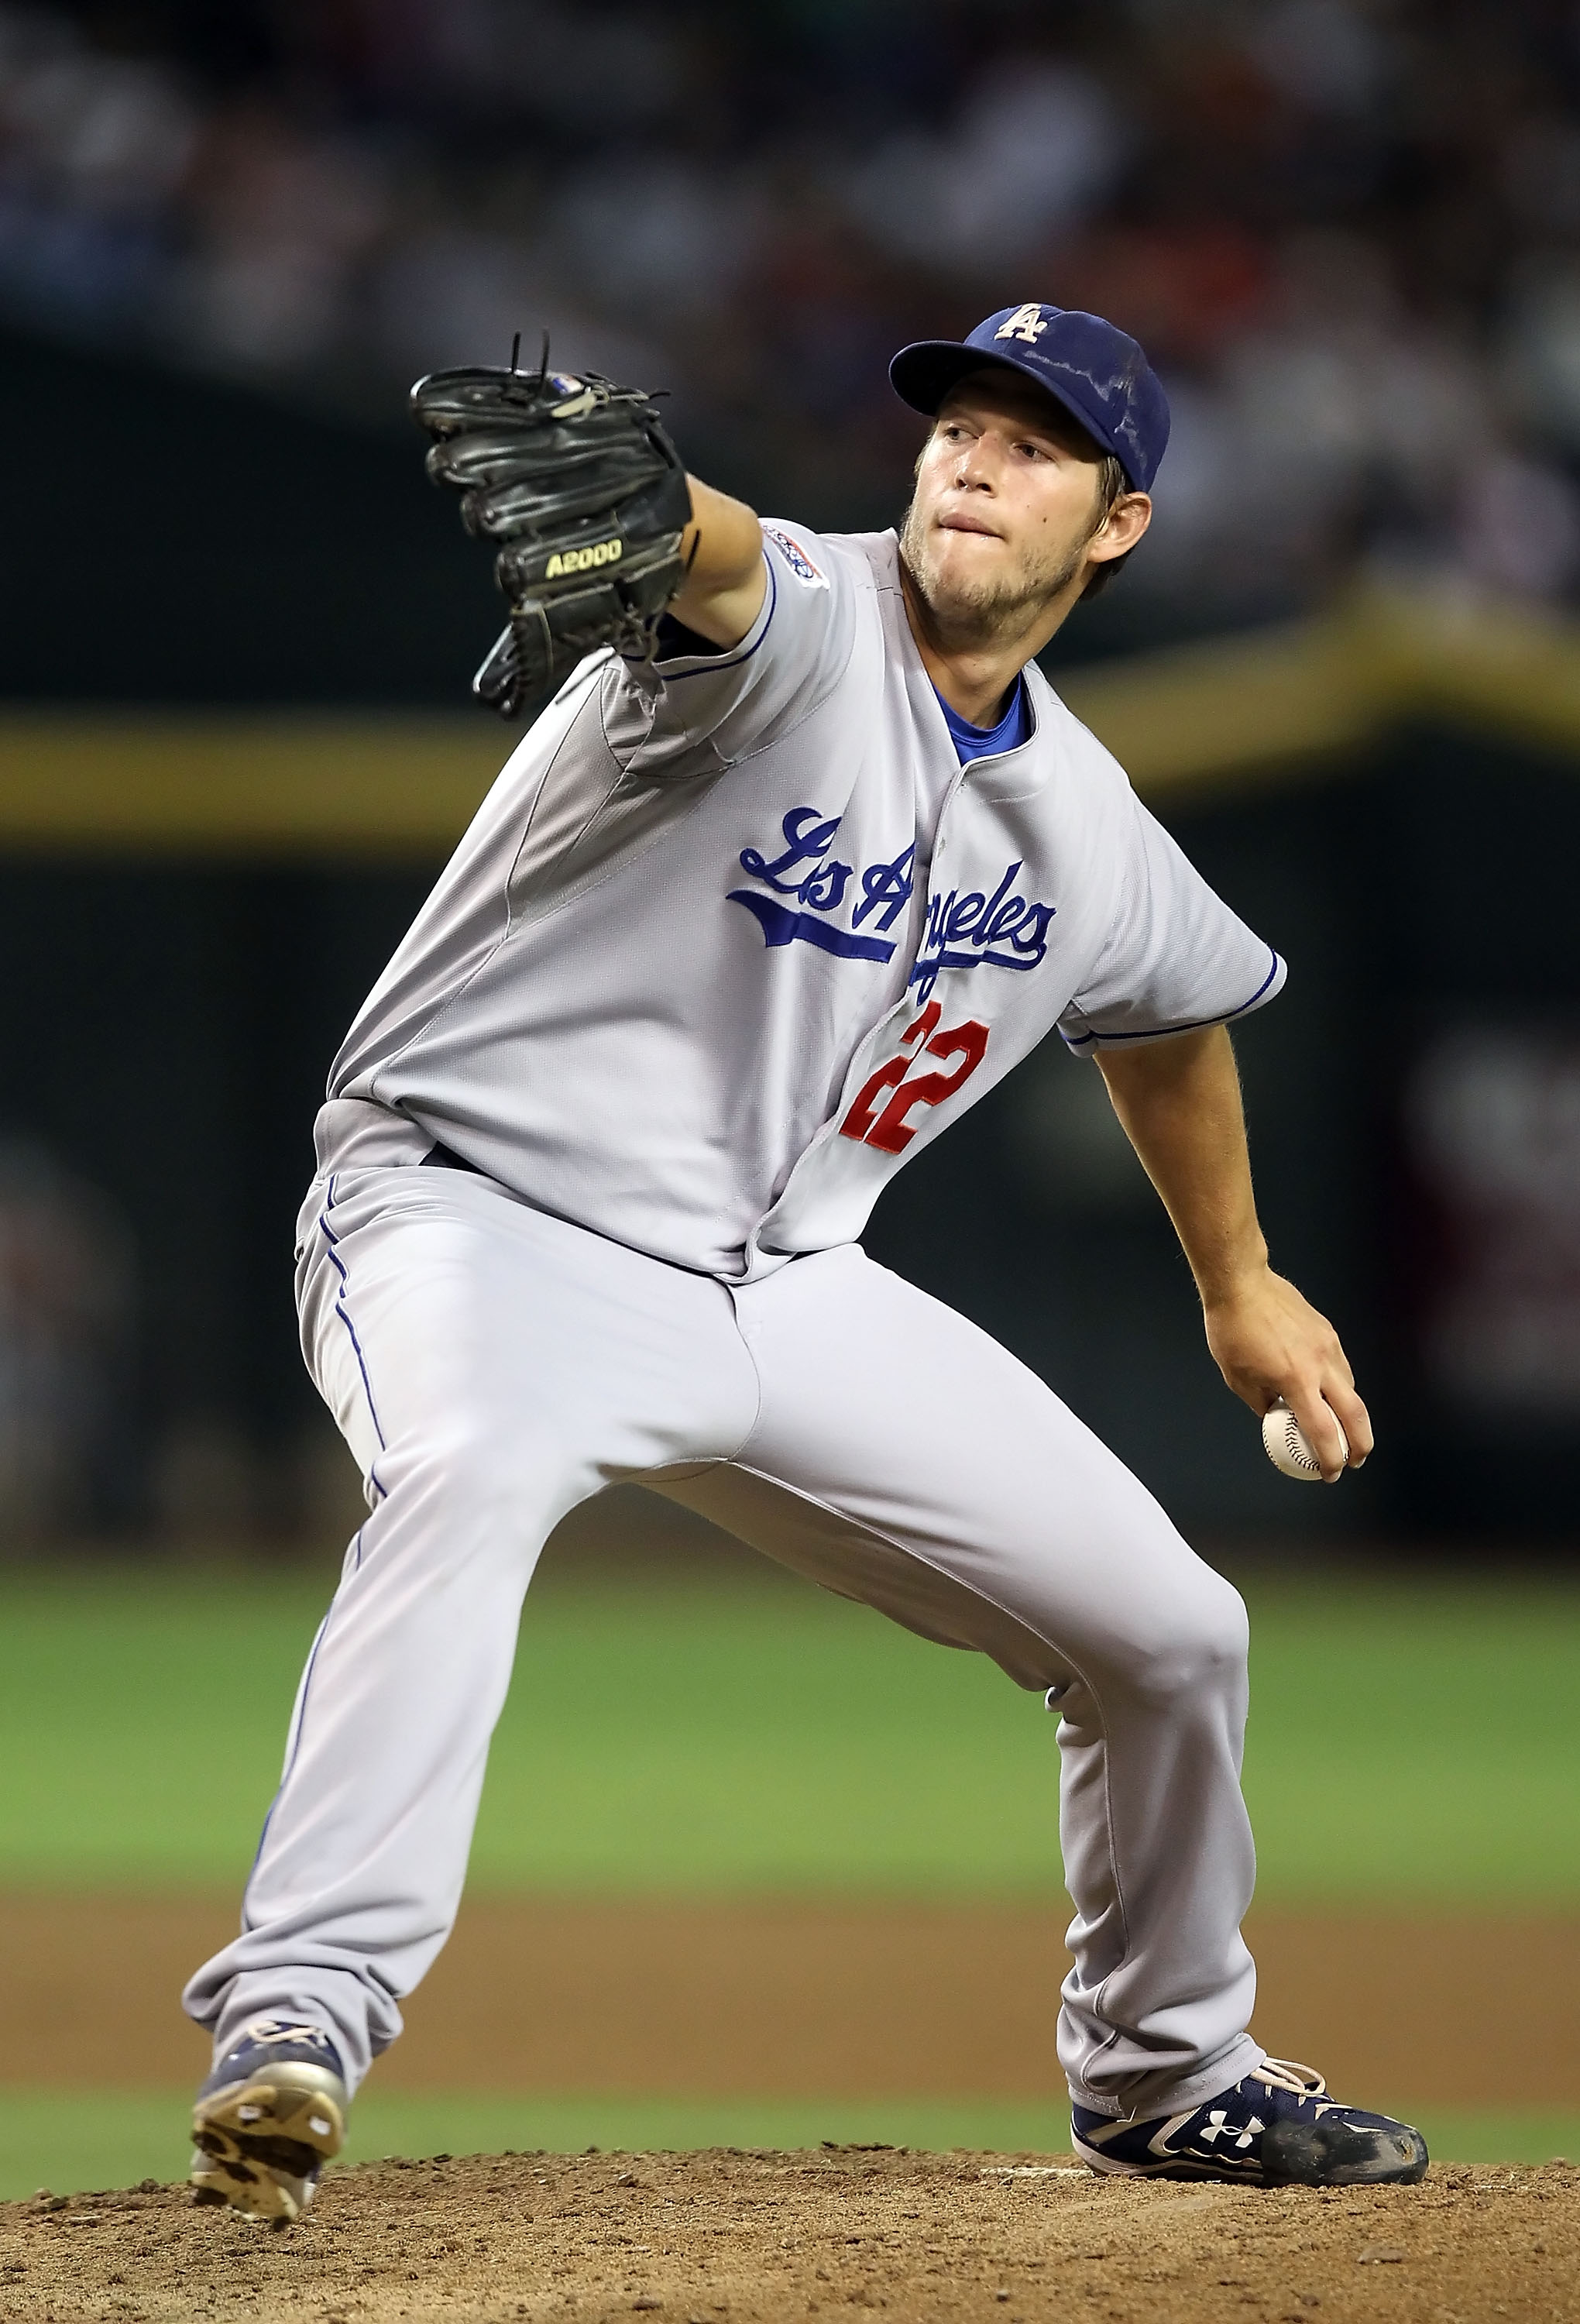 PHOENIX - SEPTEMBER 24:  Starting pitcher Clayton Kershaw #22 of the Los Angeles Dodgers pitches against the Arizona Diamondbacks during the Major League Baseball game at Chase Field on September 24, 2010 in Phoenix, Arizona.  (Photo by Christian Petersen